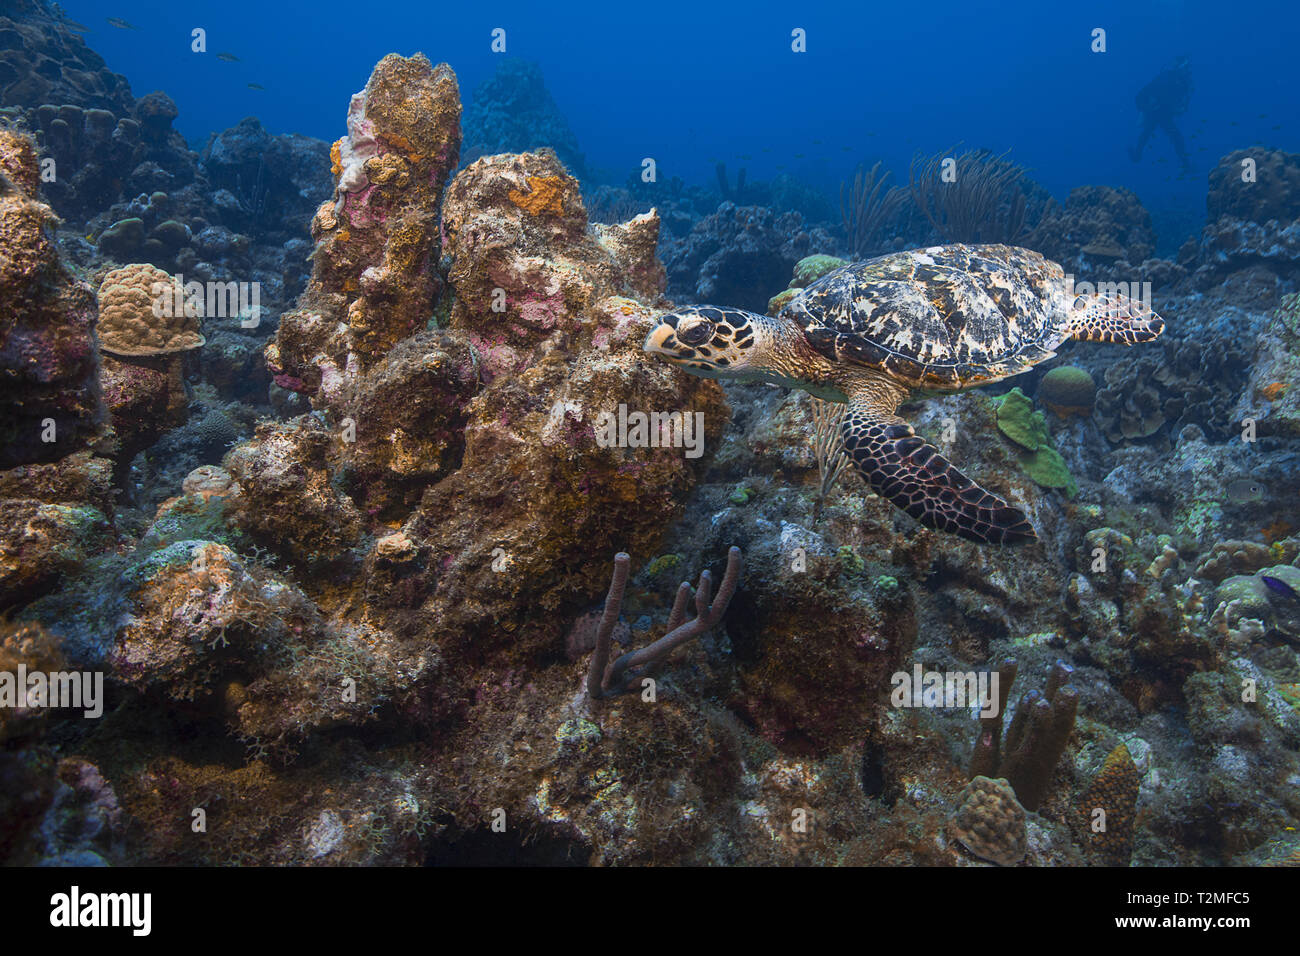 Hawksbill turtle glides effortlessly through reef, Curacao Stock Photo